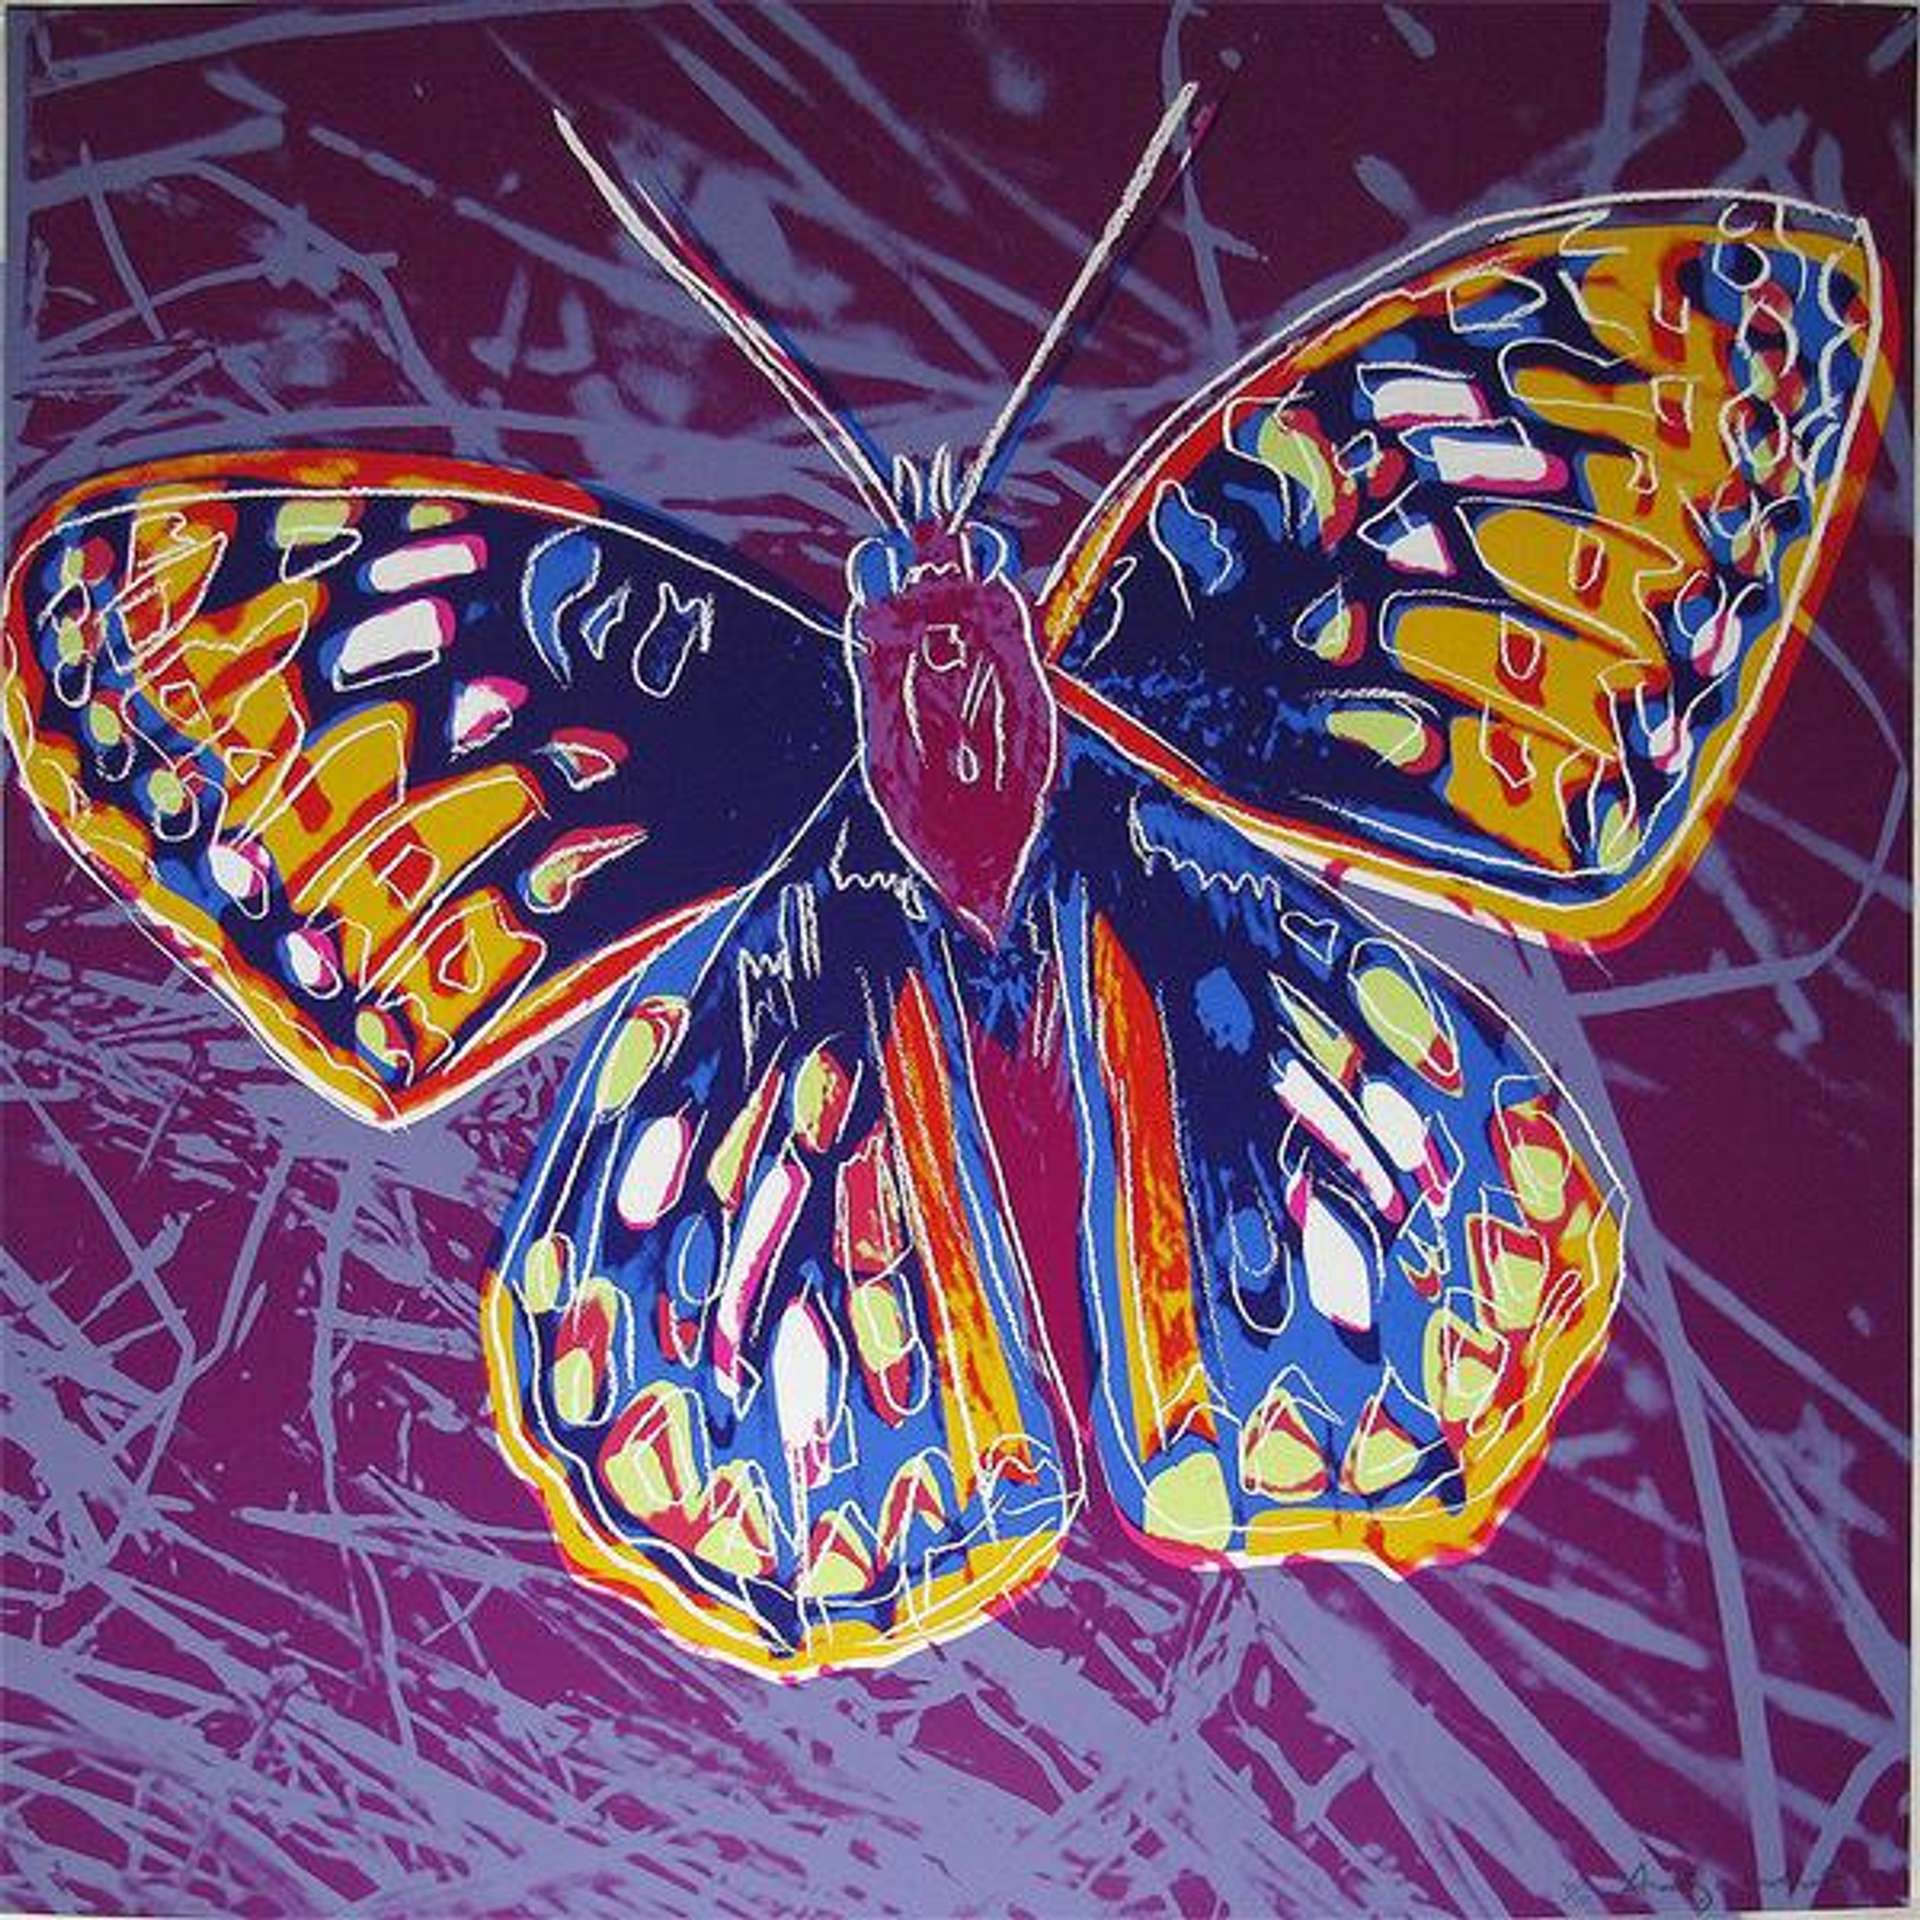 Andy Warhol: San Francisco Silverspot Butterfly (F. & S. II 298) - Signed Print